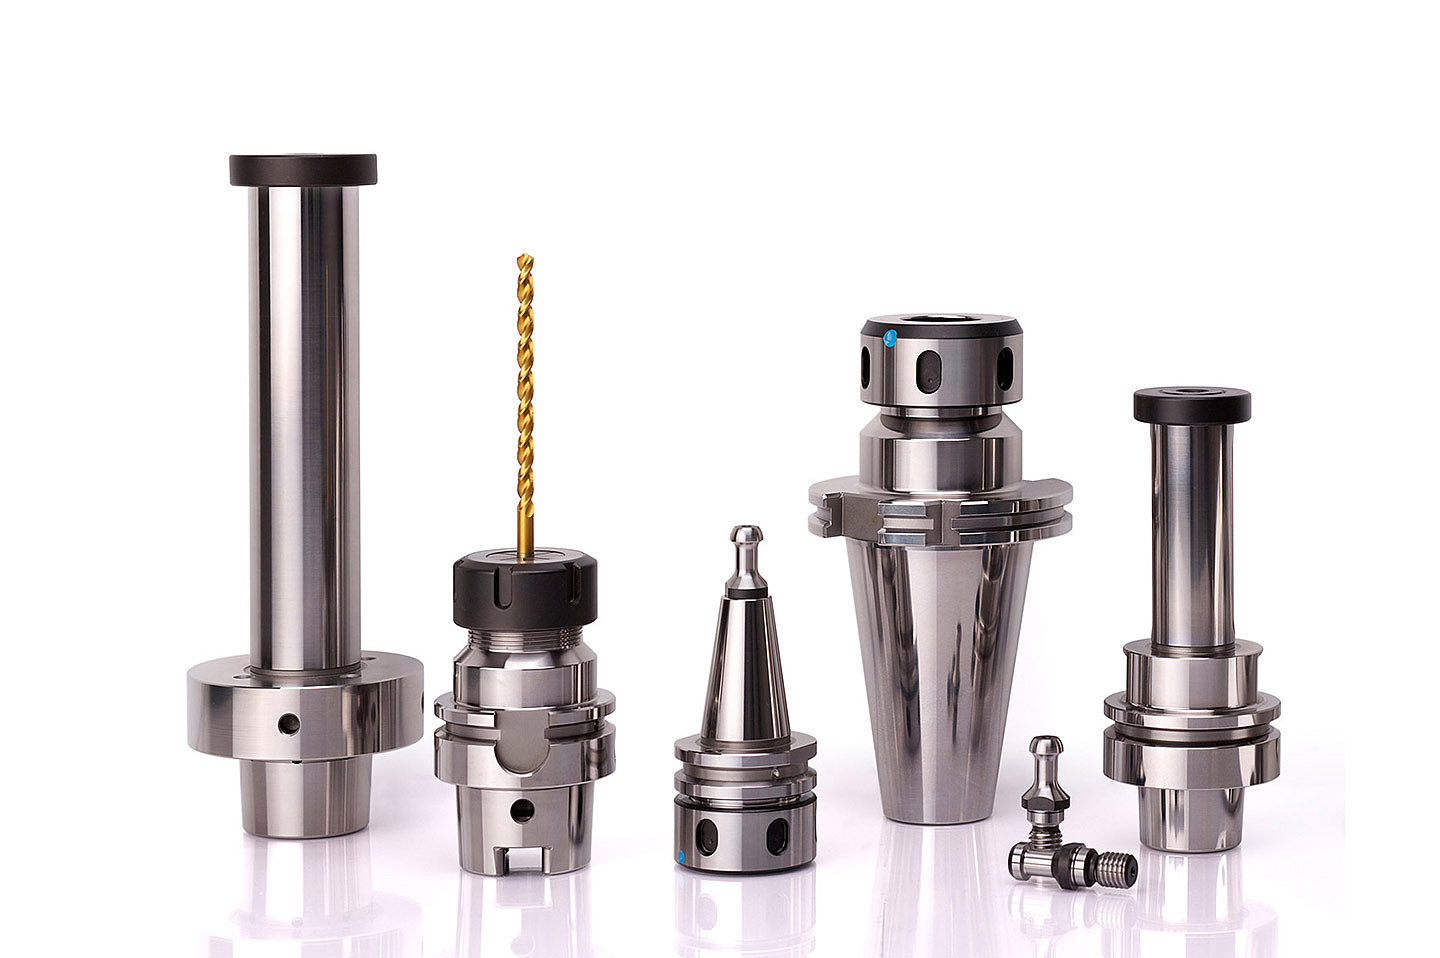 ALSTO Präzisionsspannwerkzeuge GmbH is a specialist for high quality steep-angle taper and hollow shank taper tool holders.